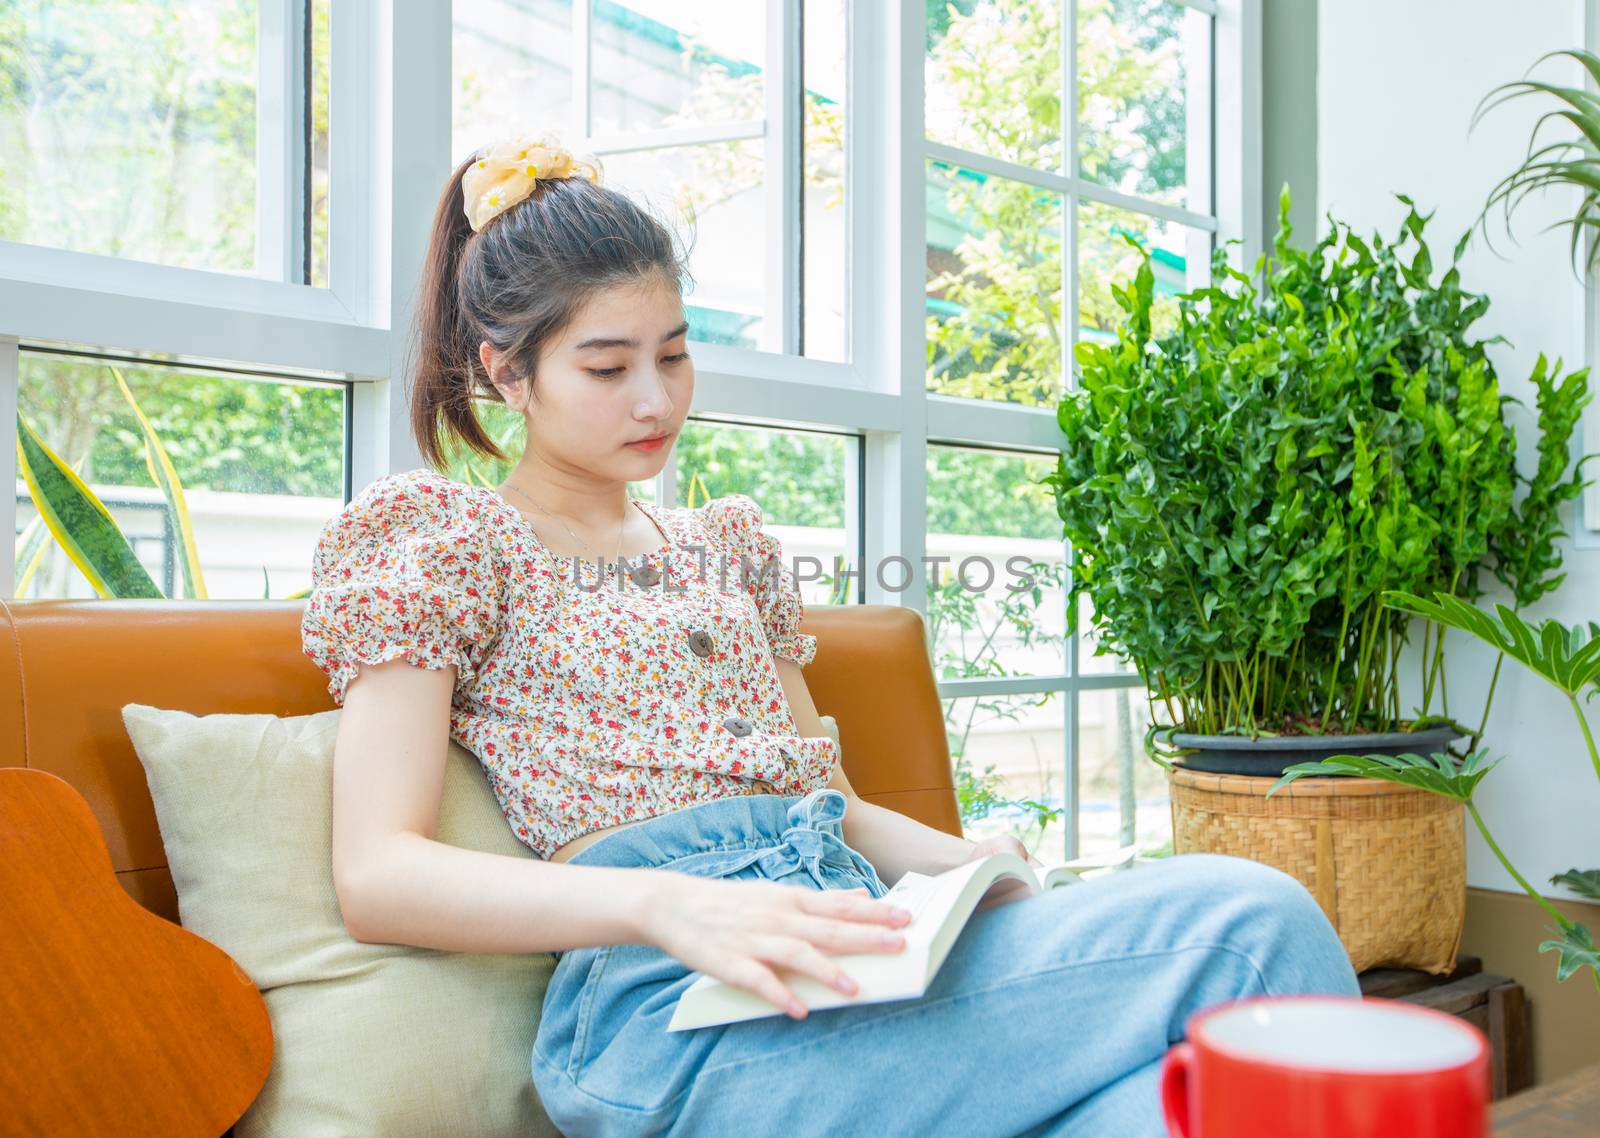 Asian women reading a book in the garden at home on a relaxing time by Tuiphotoengineer